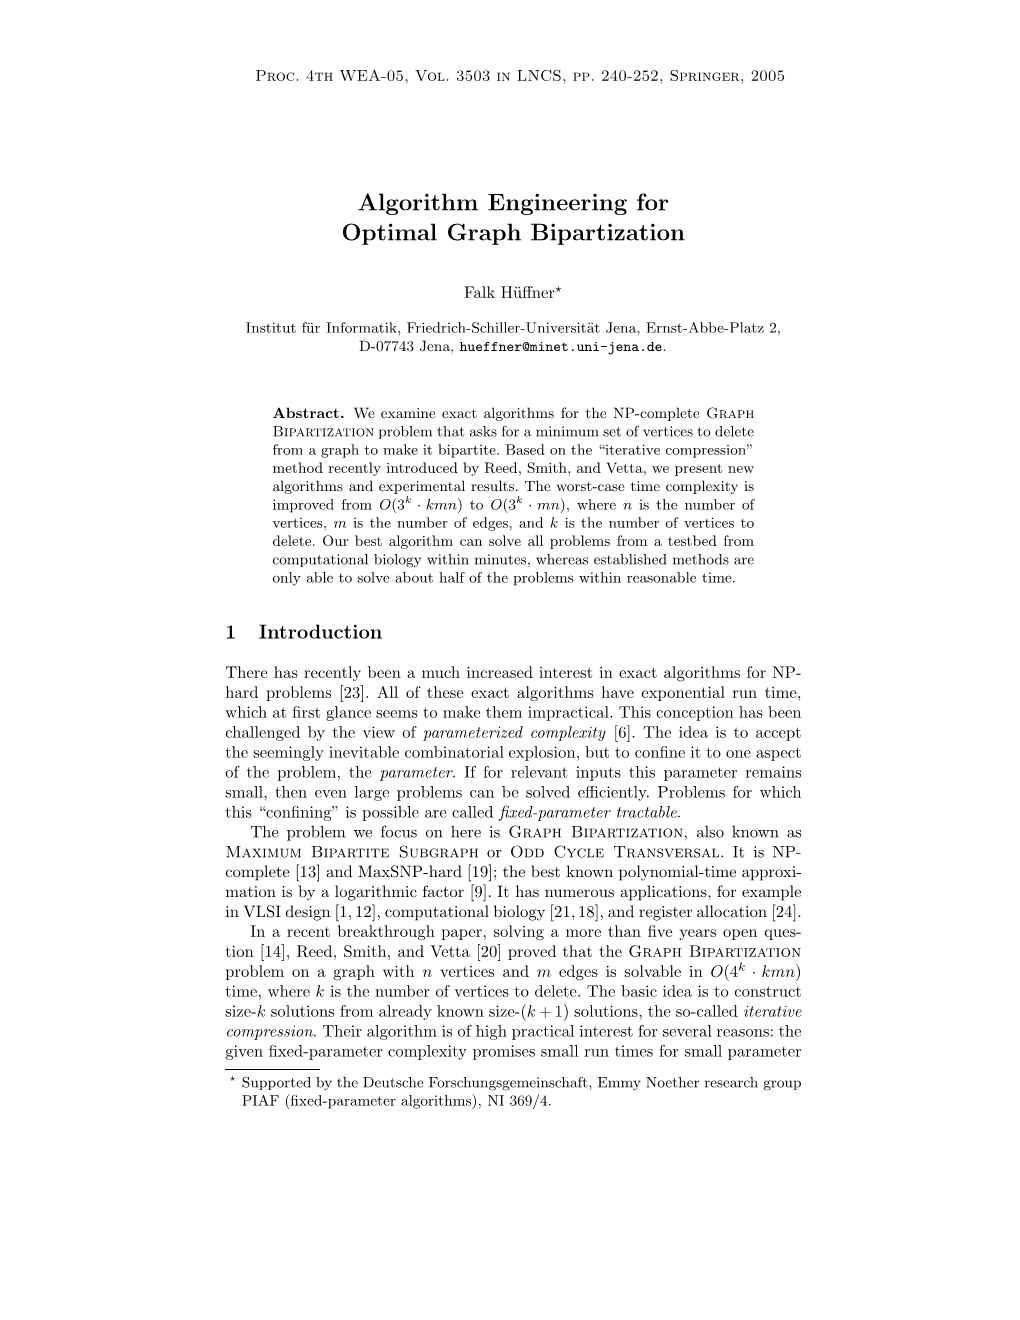 Algorithm Engineering for Optimal Graph Bipartization